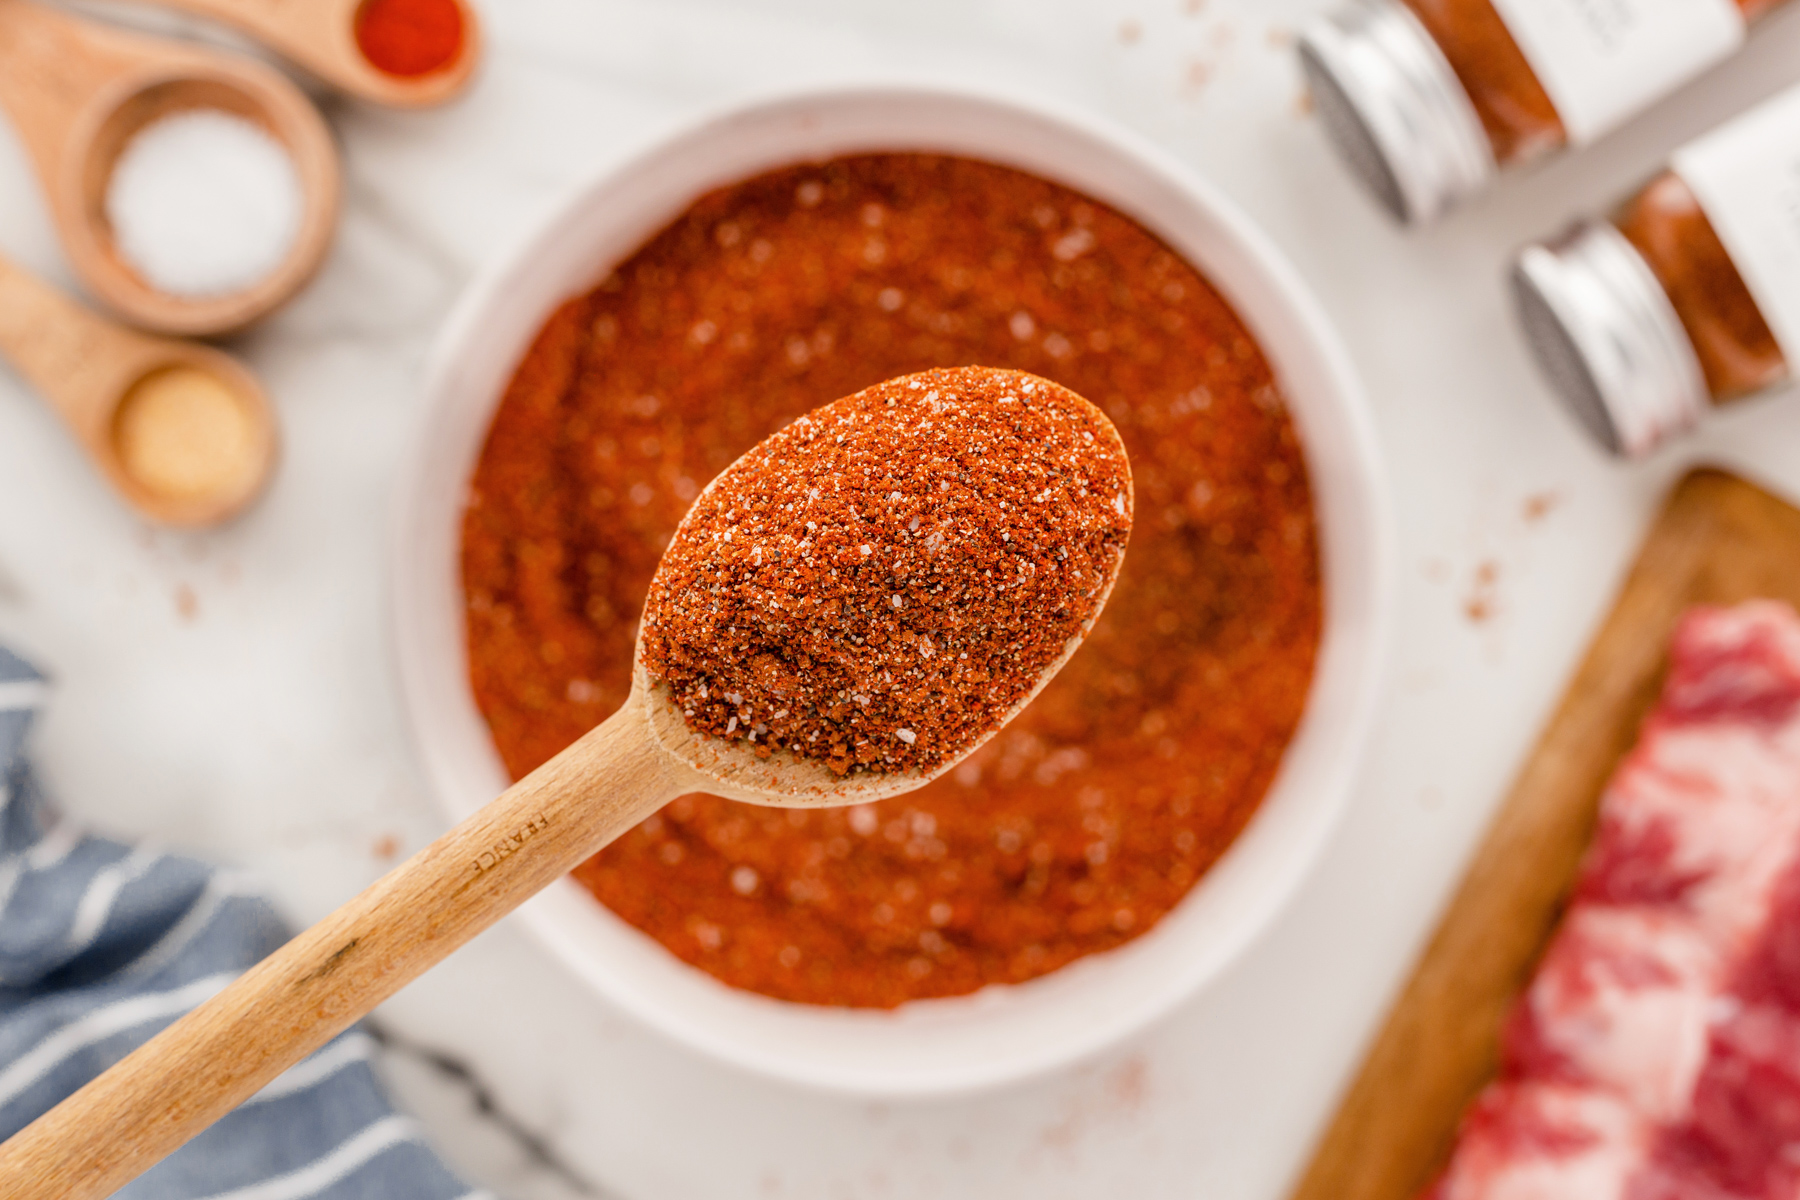 BBQ Rub on a wooden spoon over a bowl full of BBQ rub.